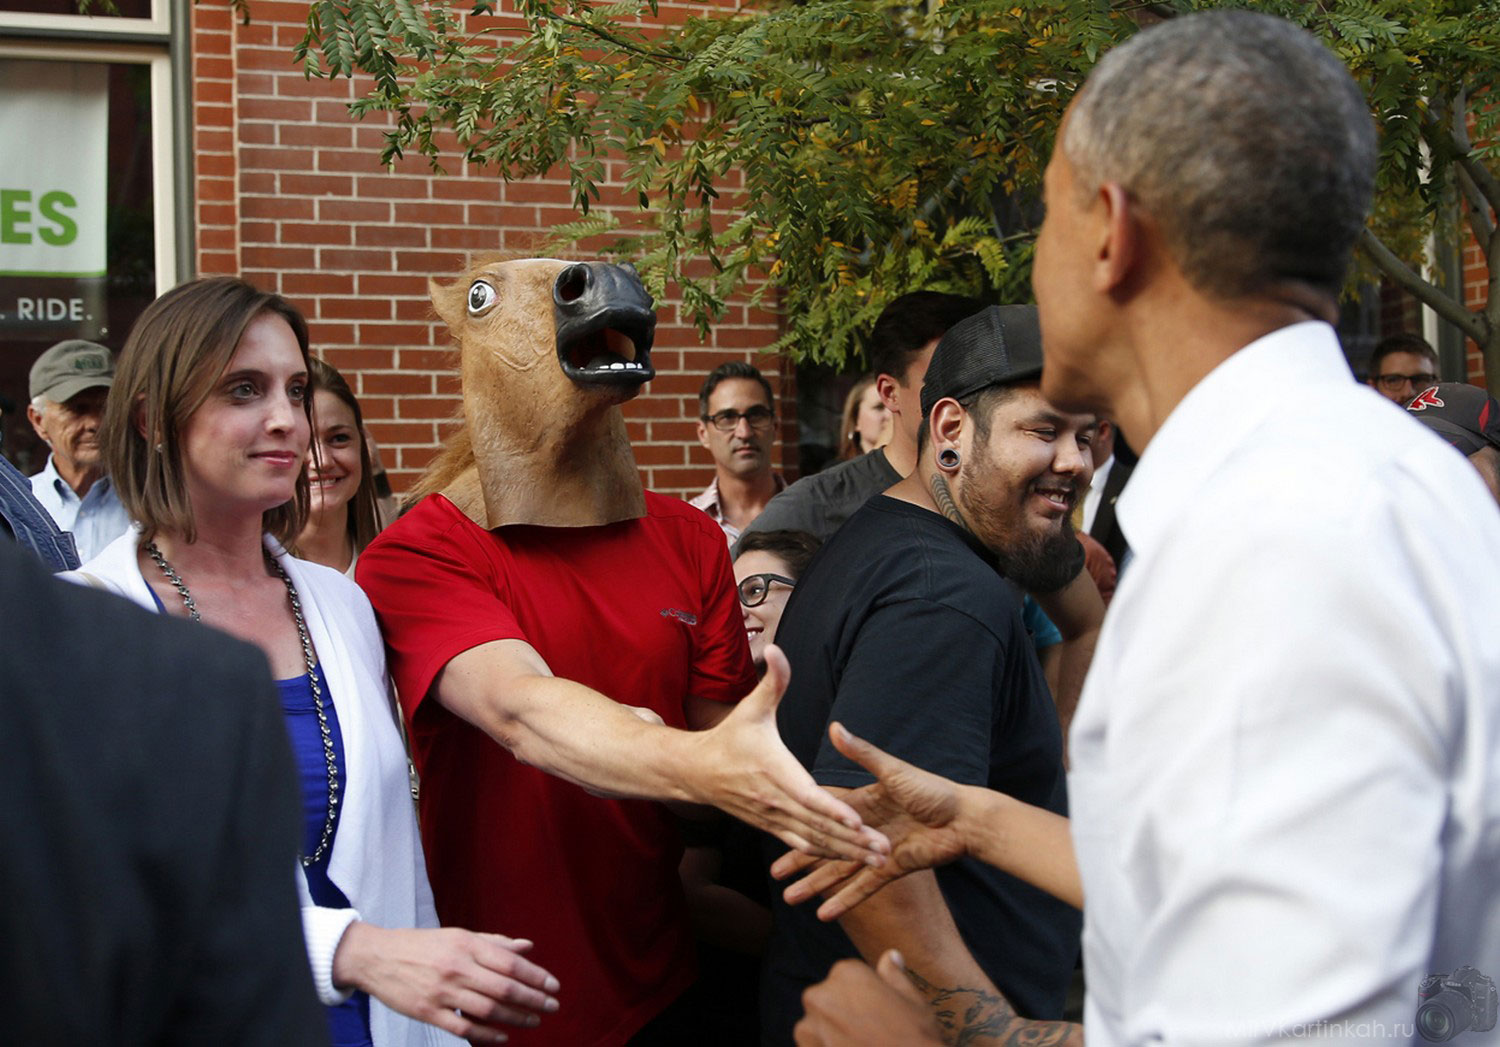 Barack Obama greets a man wearing a horse mask during a walkabout in Denver.